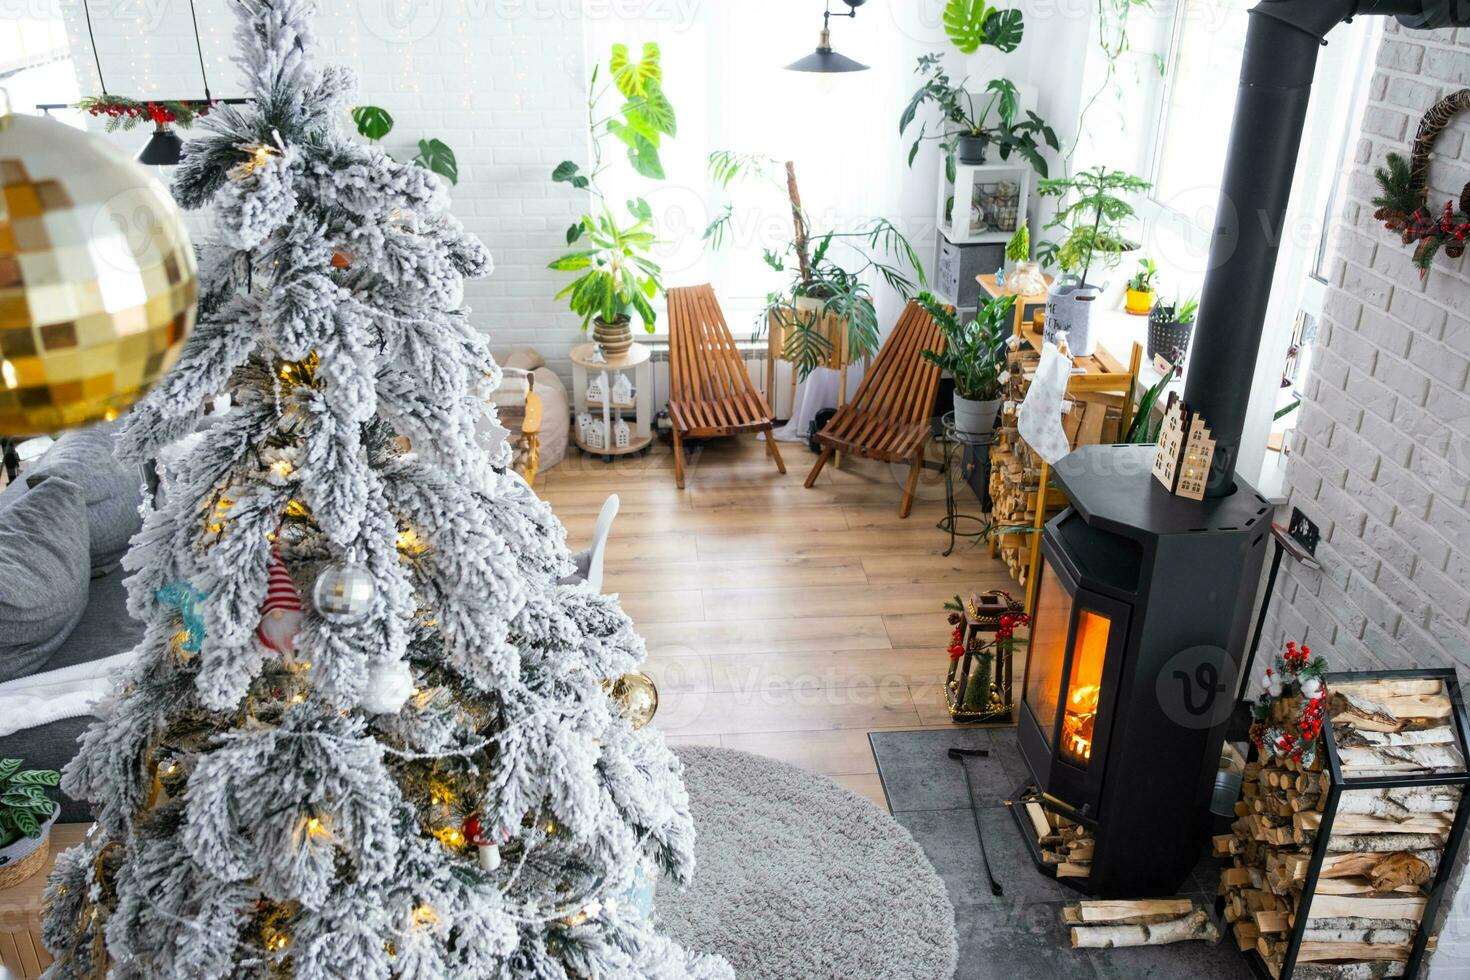 Festive white modern interior of house is decorated for Christmas and New Year in loft style with black stove, fireplace, Christmas tree. Potted plants, firewood in the woodpile photo